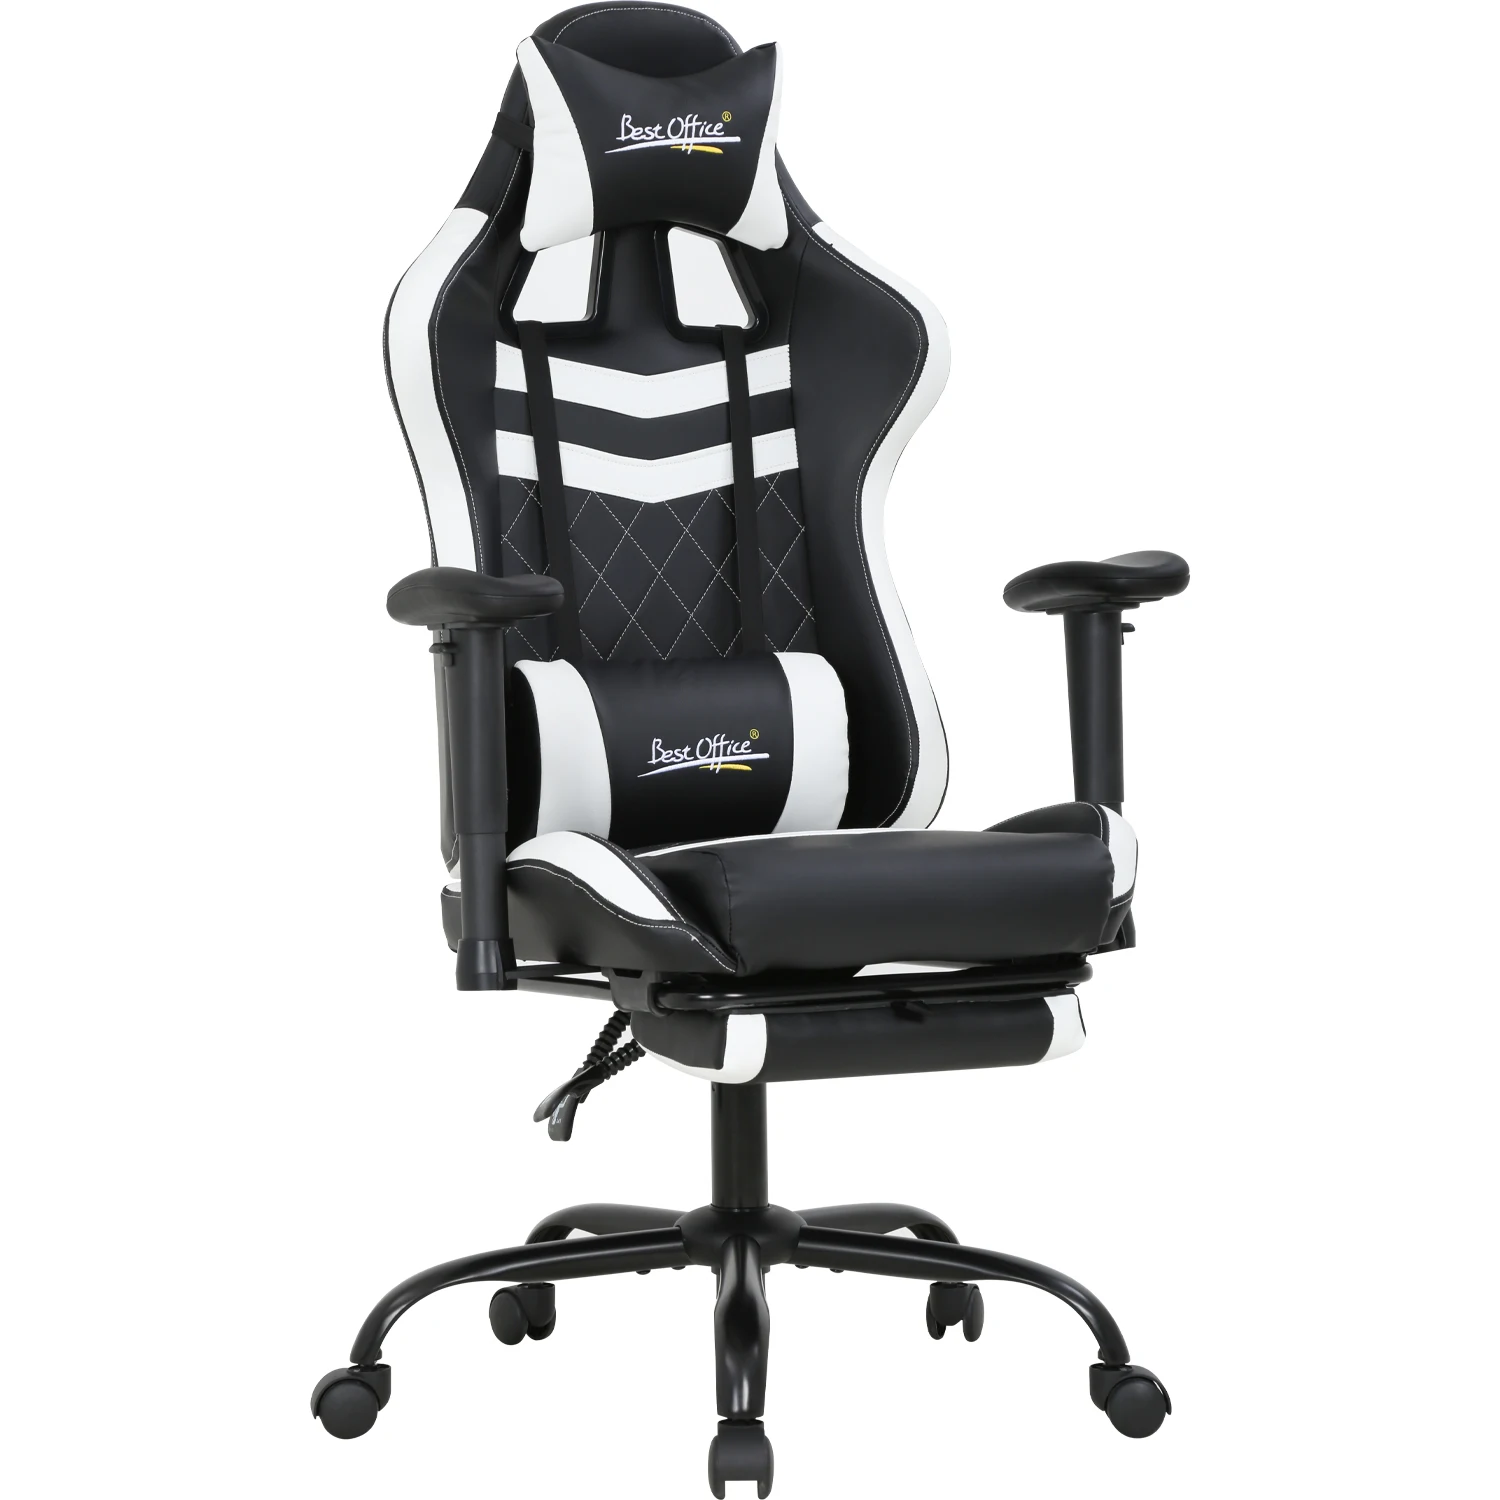 White Gaming Chair Ergonomic With Lumbar Support Headrest Armrest Footrest Buy Gaming Chair Computer Chair Racing Chair Product On Alibaba Com